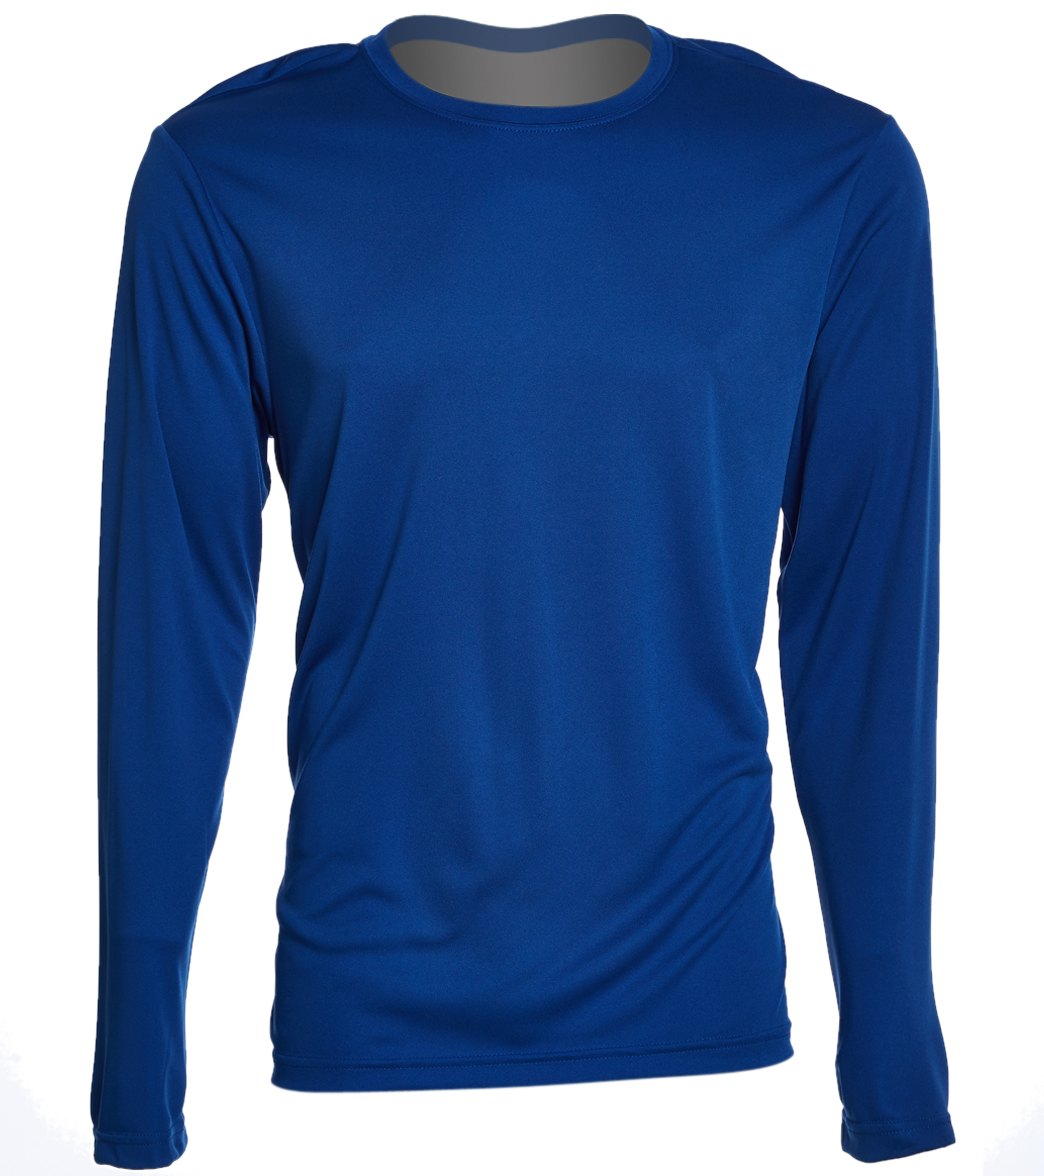 Men's Long Sleeve Posicharge Competitortm Tee Shirt - True Royal X-Small Polyester - Swimoutlet.com